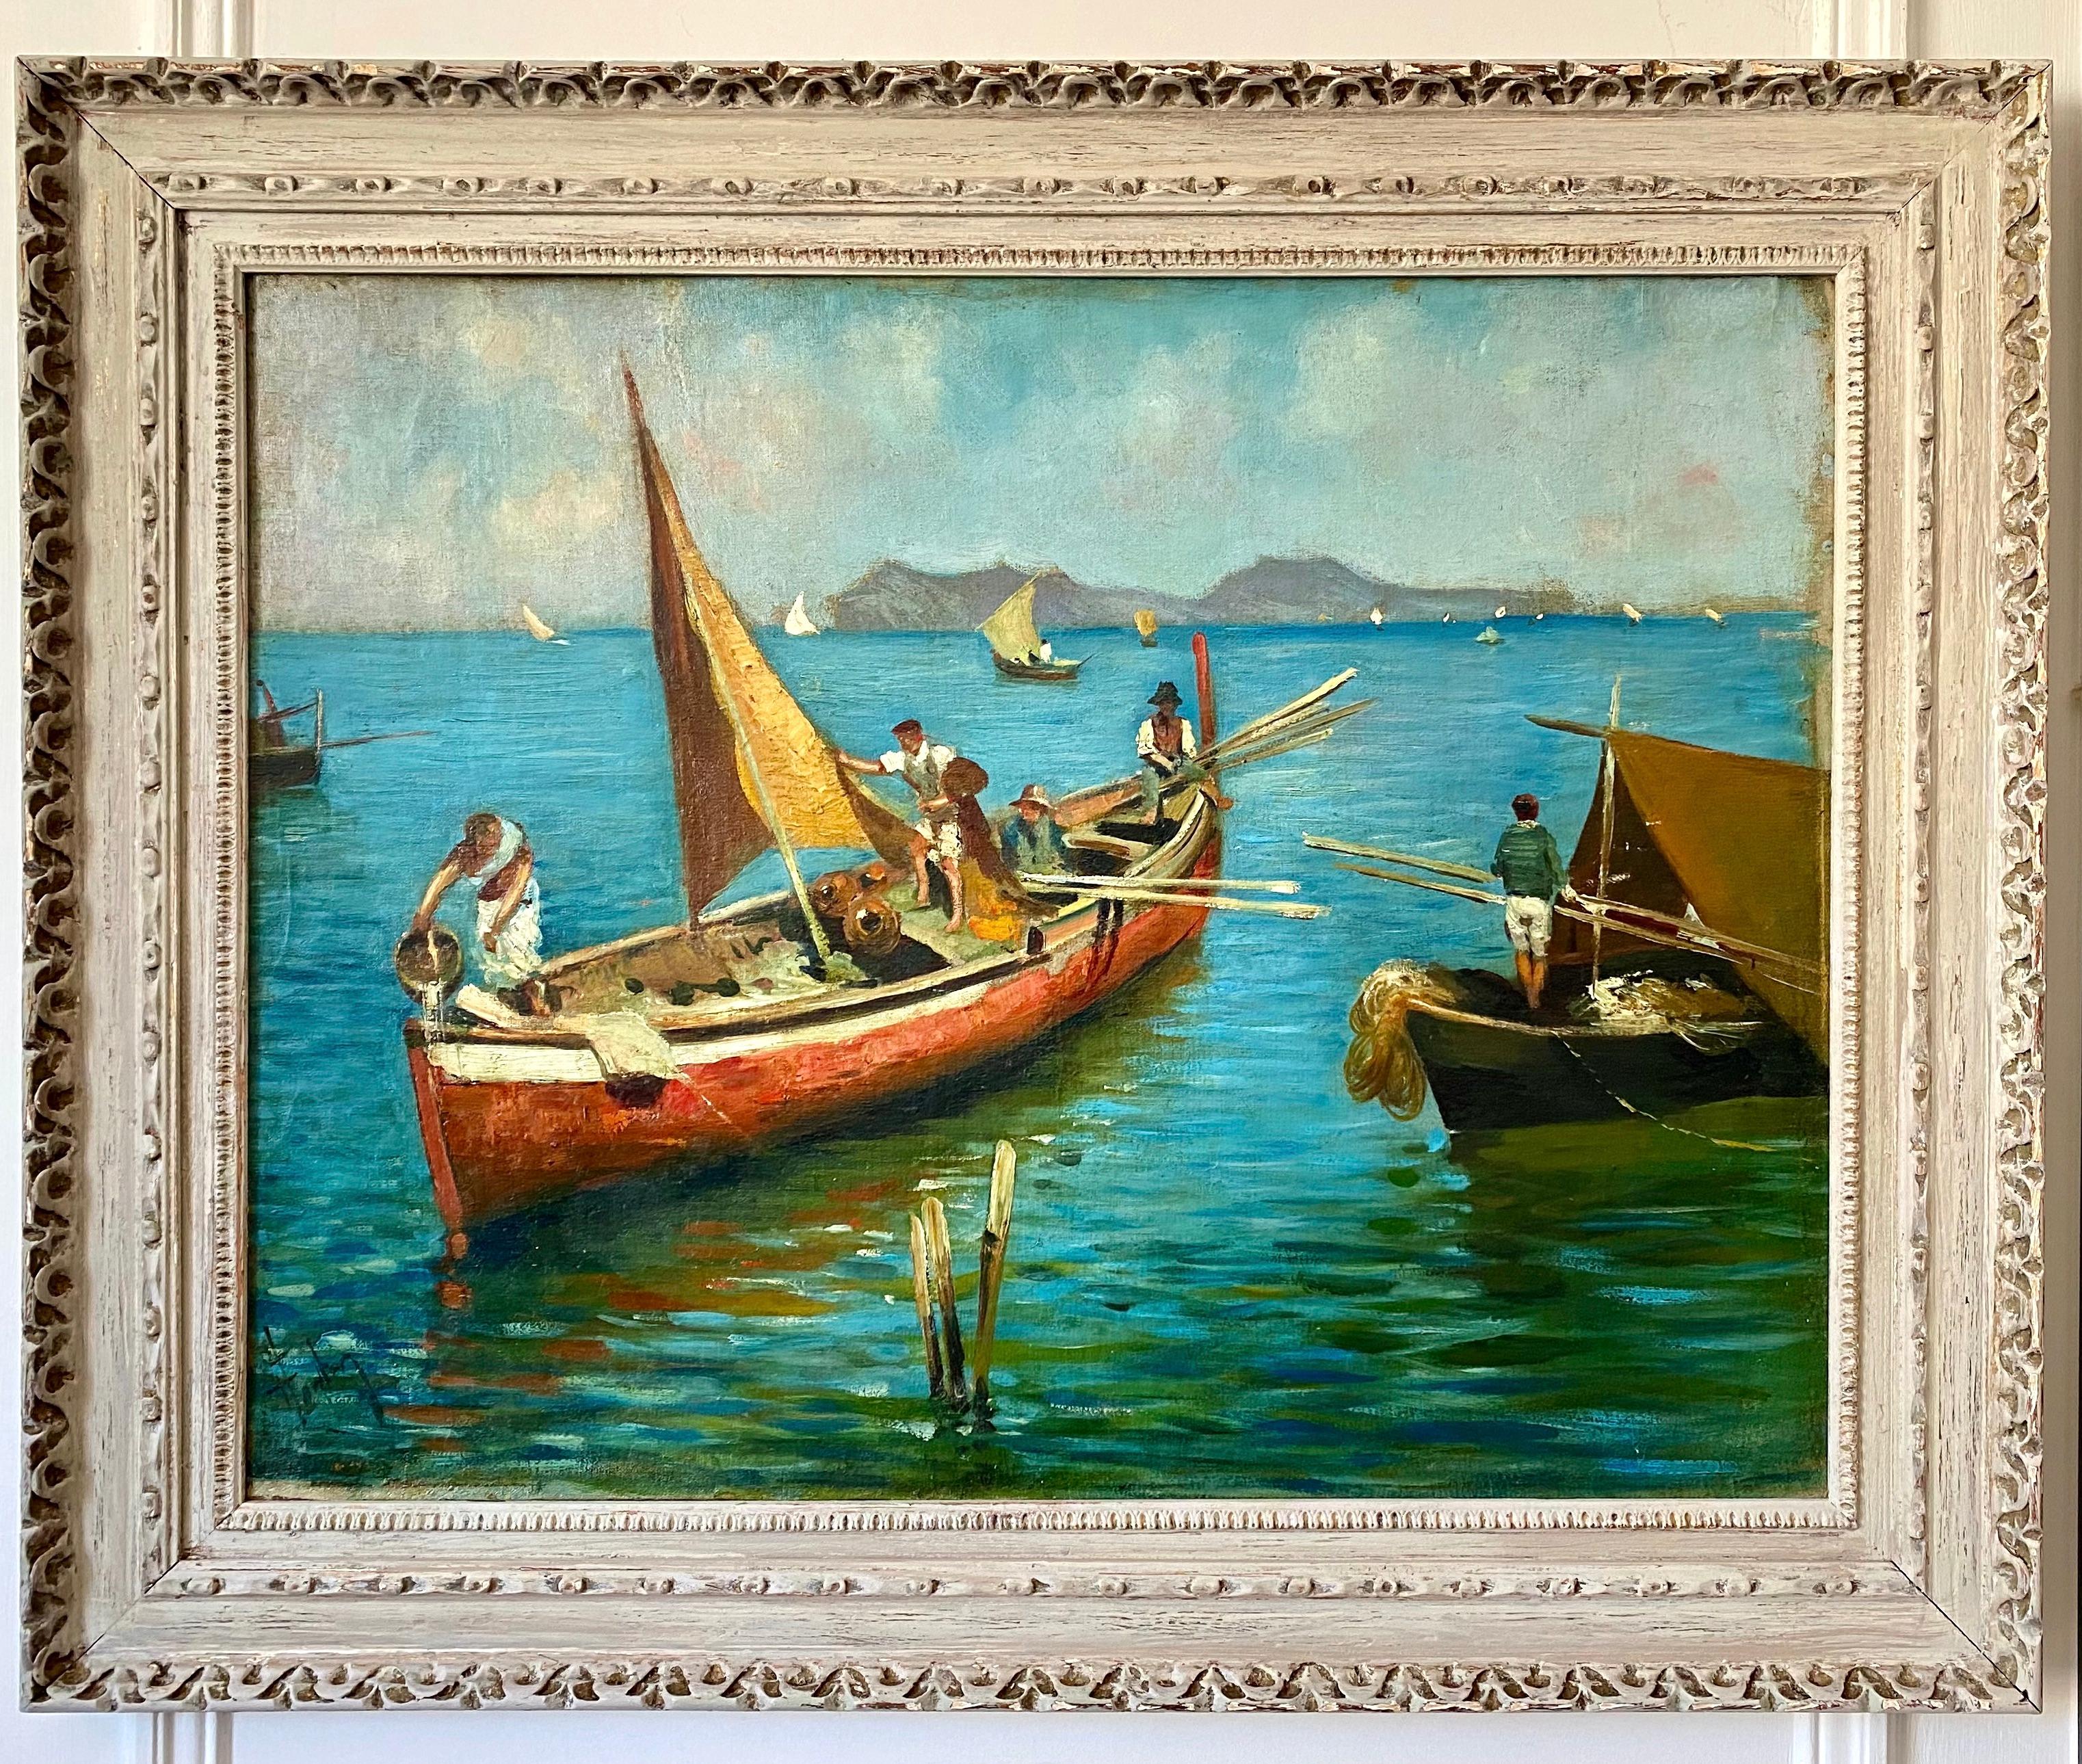 All the light and the colours of the mediterranean in one gorgeous, life affirming picture! Looking at this wonderfully sun drenched oil on board by Leo Fontan, dating from circa 1935-40, feels like taking a holiday. One finds oneself leisurely